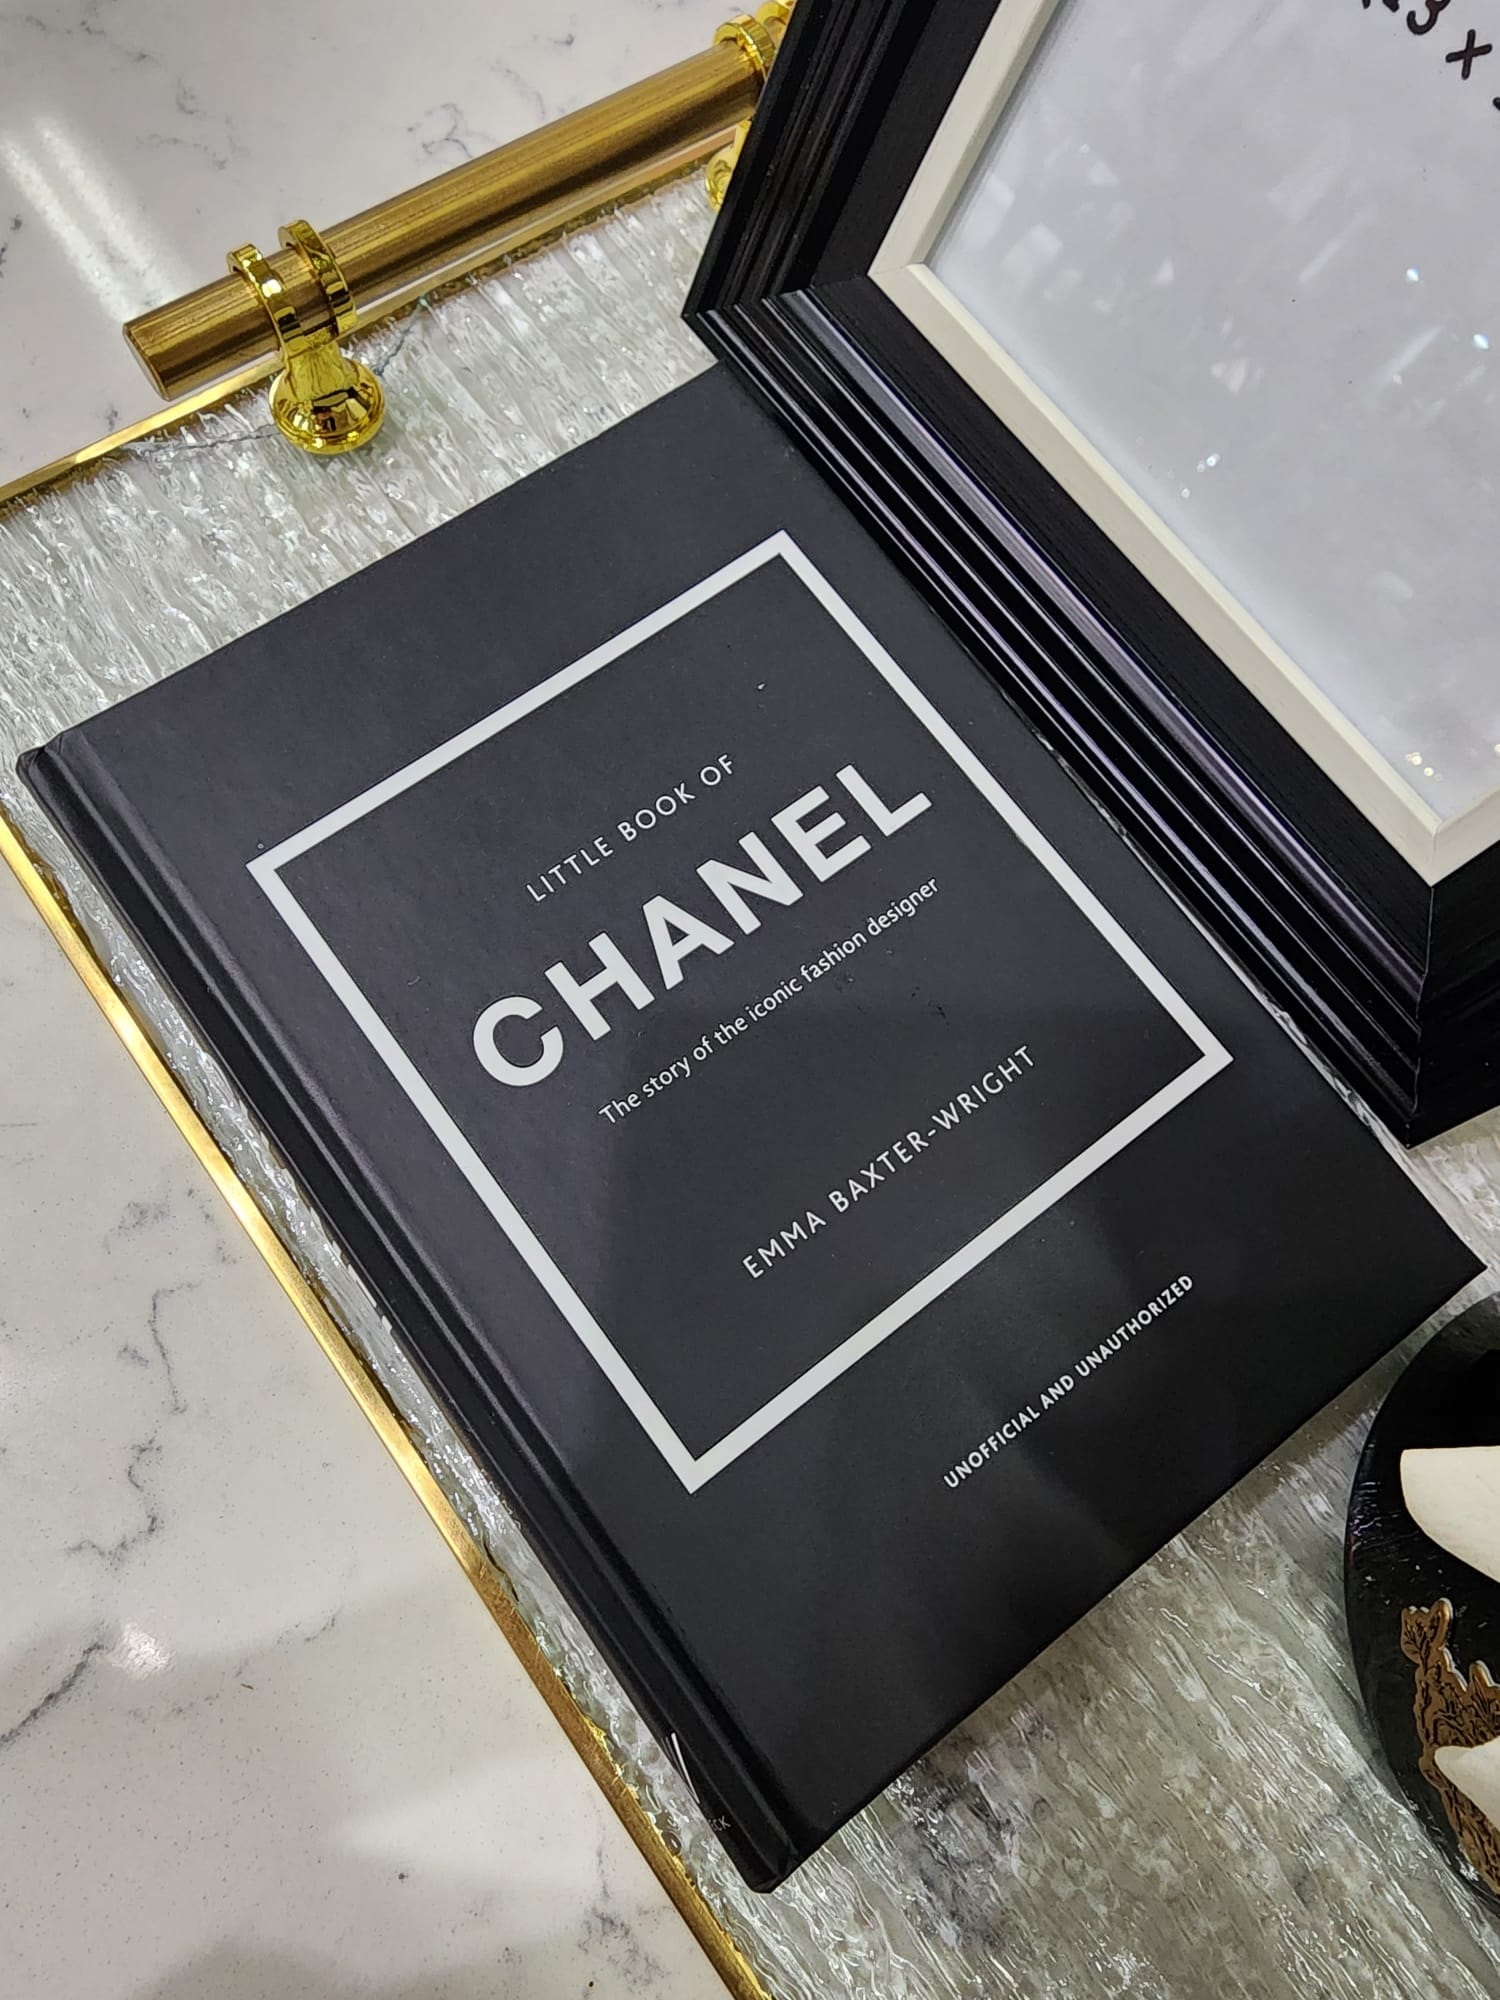 The Little Book of Chanel (Little Books of Fashion, 3): Baxter-Wright,  Emma: 9781780979021: : Books